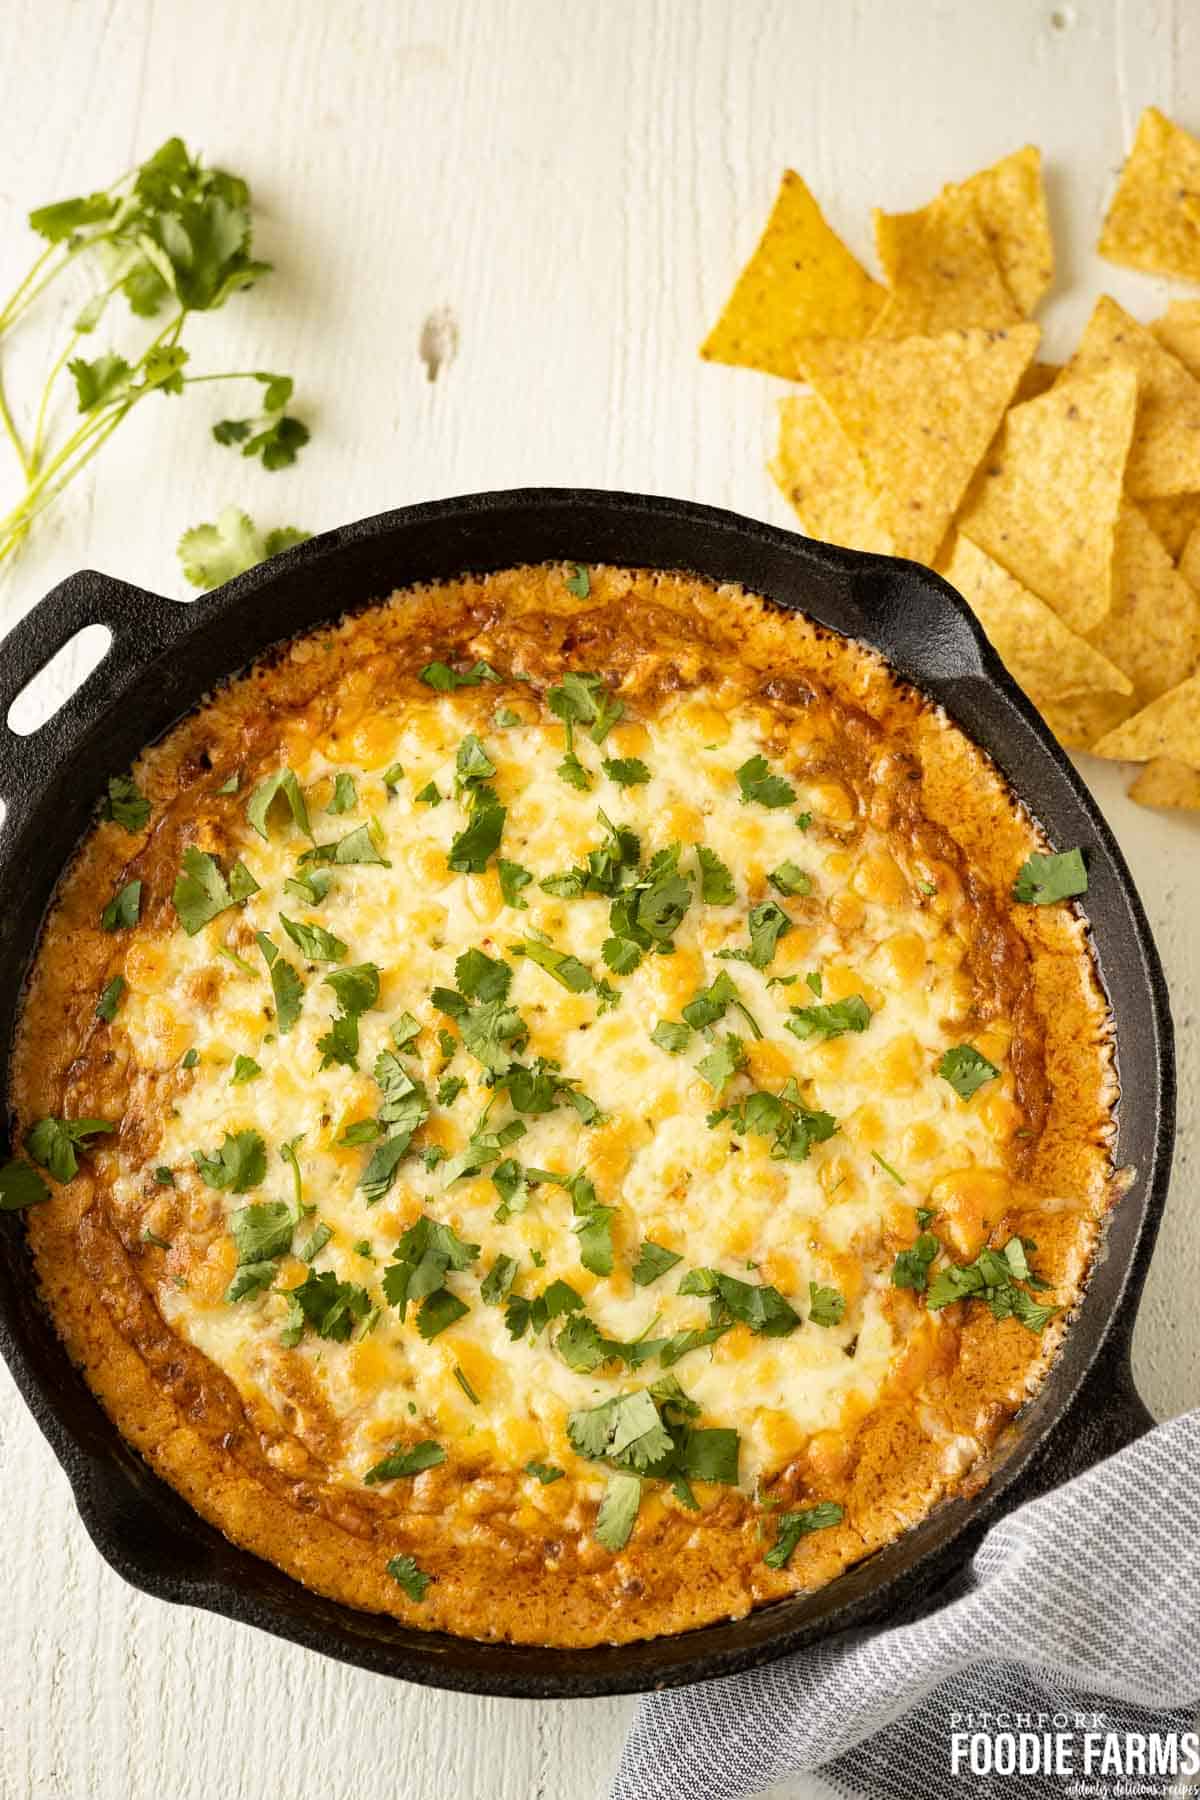 Chili Cheese Dip with cilantro and melted cheeses.